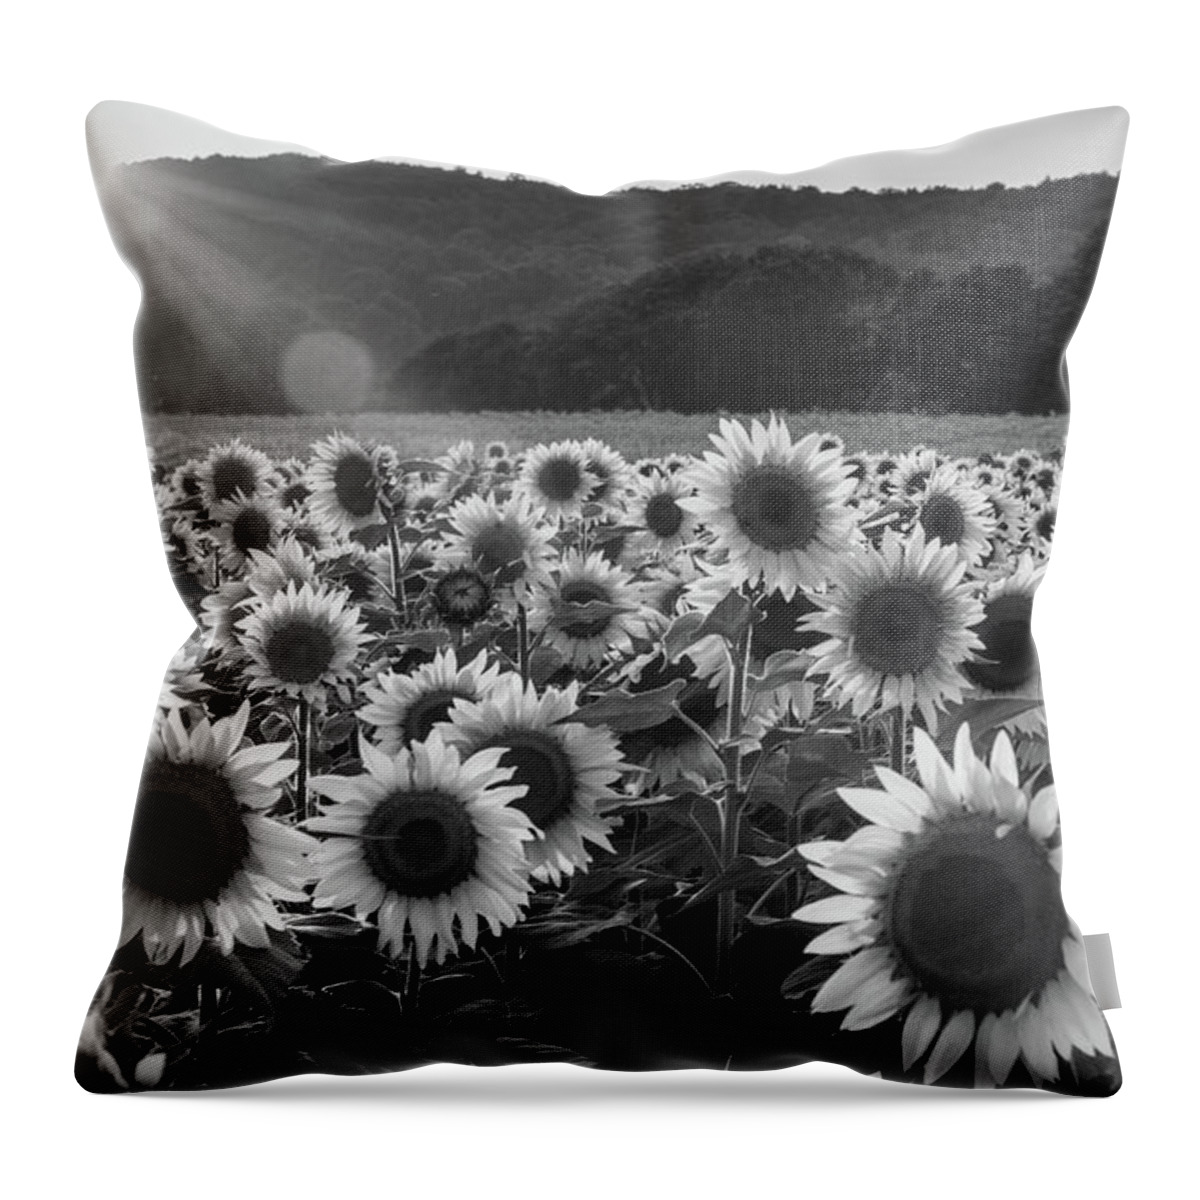 Donaldson Farms Throw Pillow featuring the photograph Monochrome Sunflowers by Kristopher Schoenleber